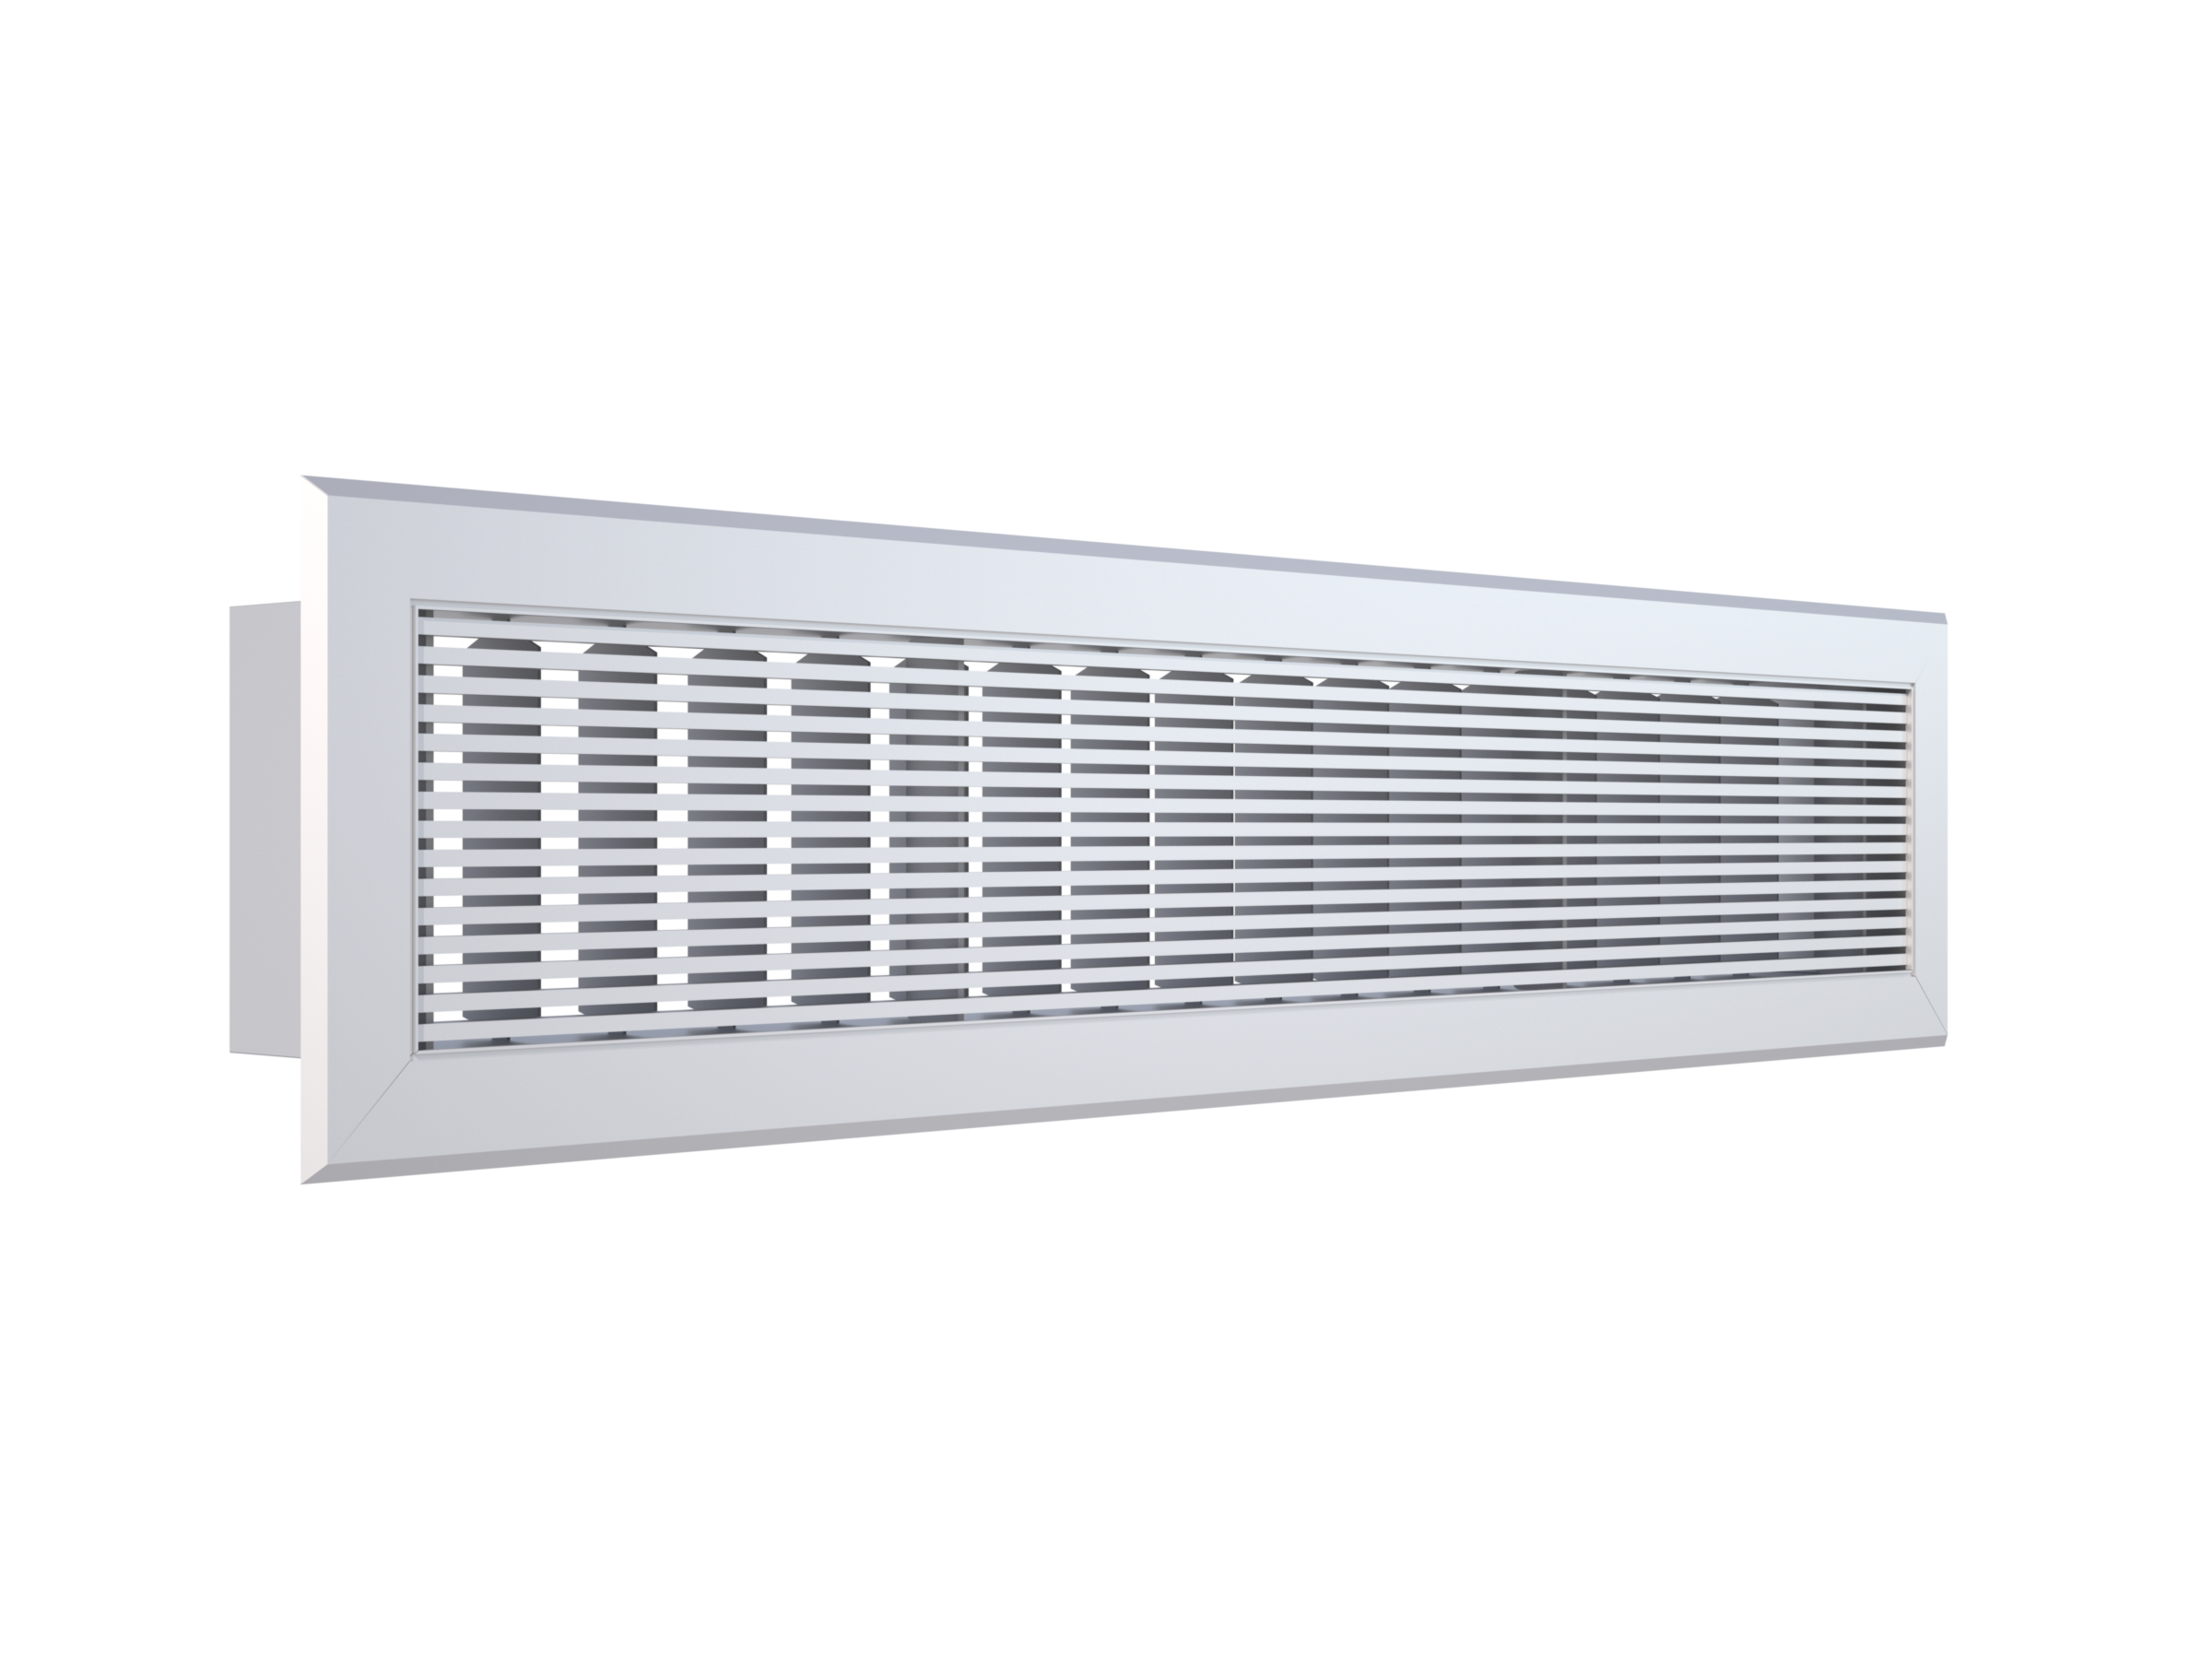 Holyoake LD-600SD Linear Bar Grille with 0-degree air discharge and 6mm blade spacing with rear adjustable blades